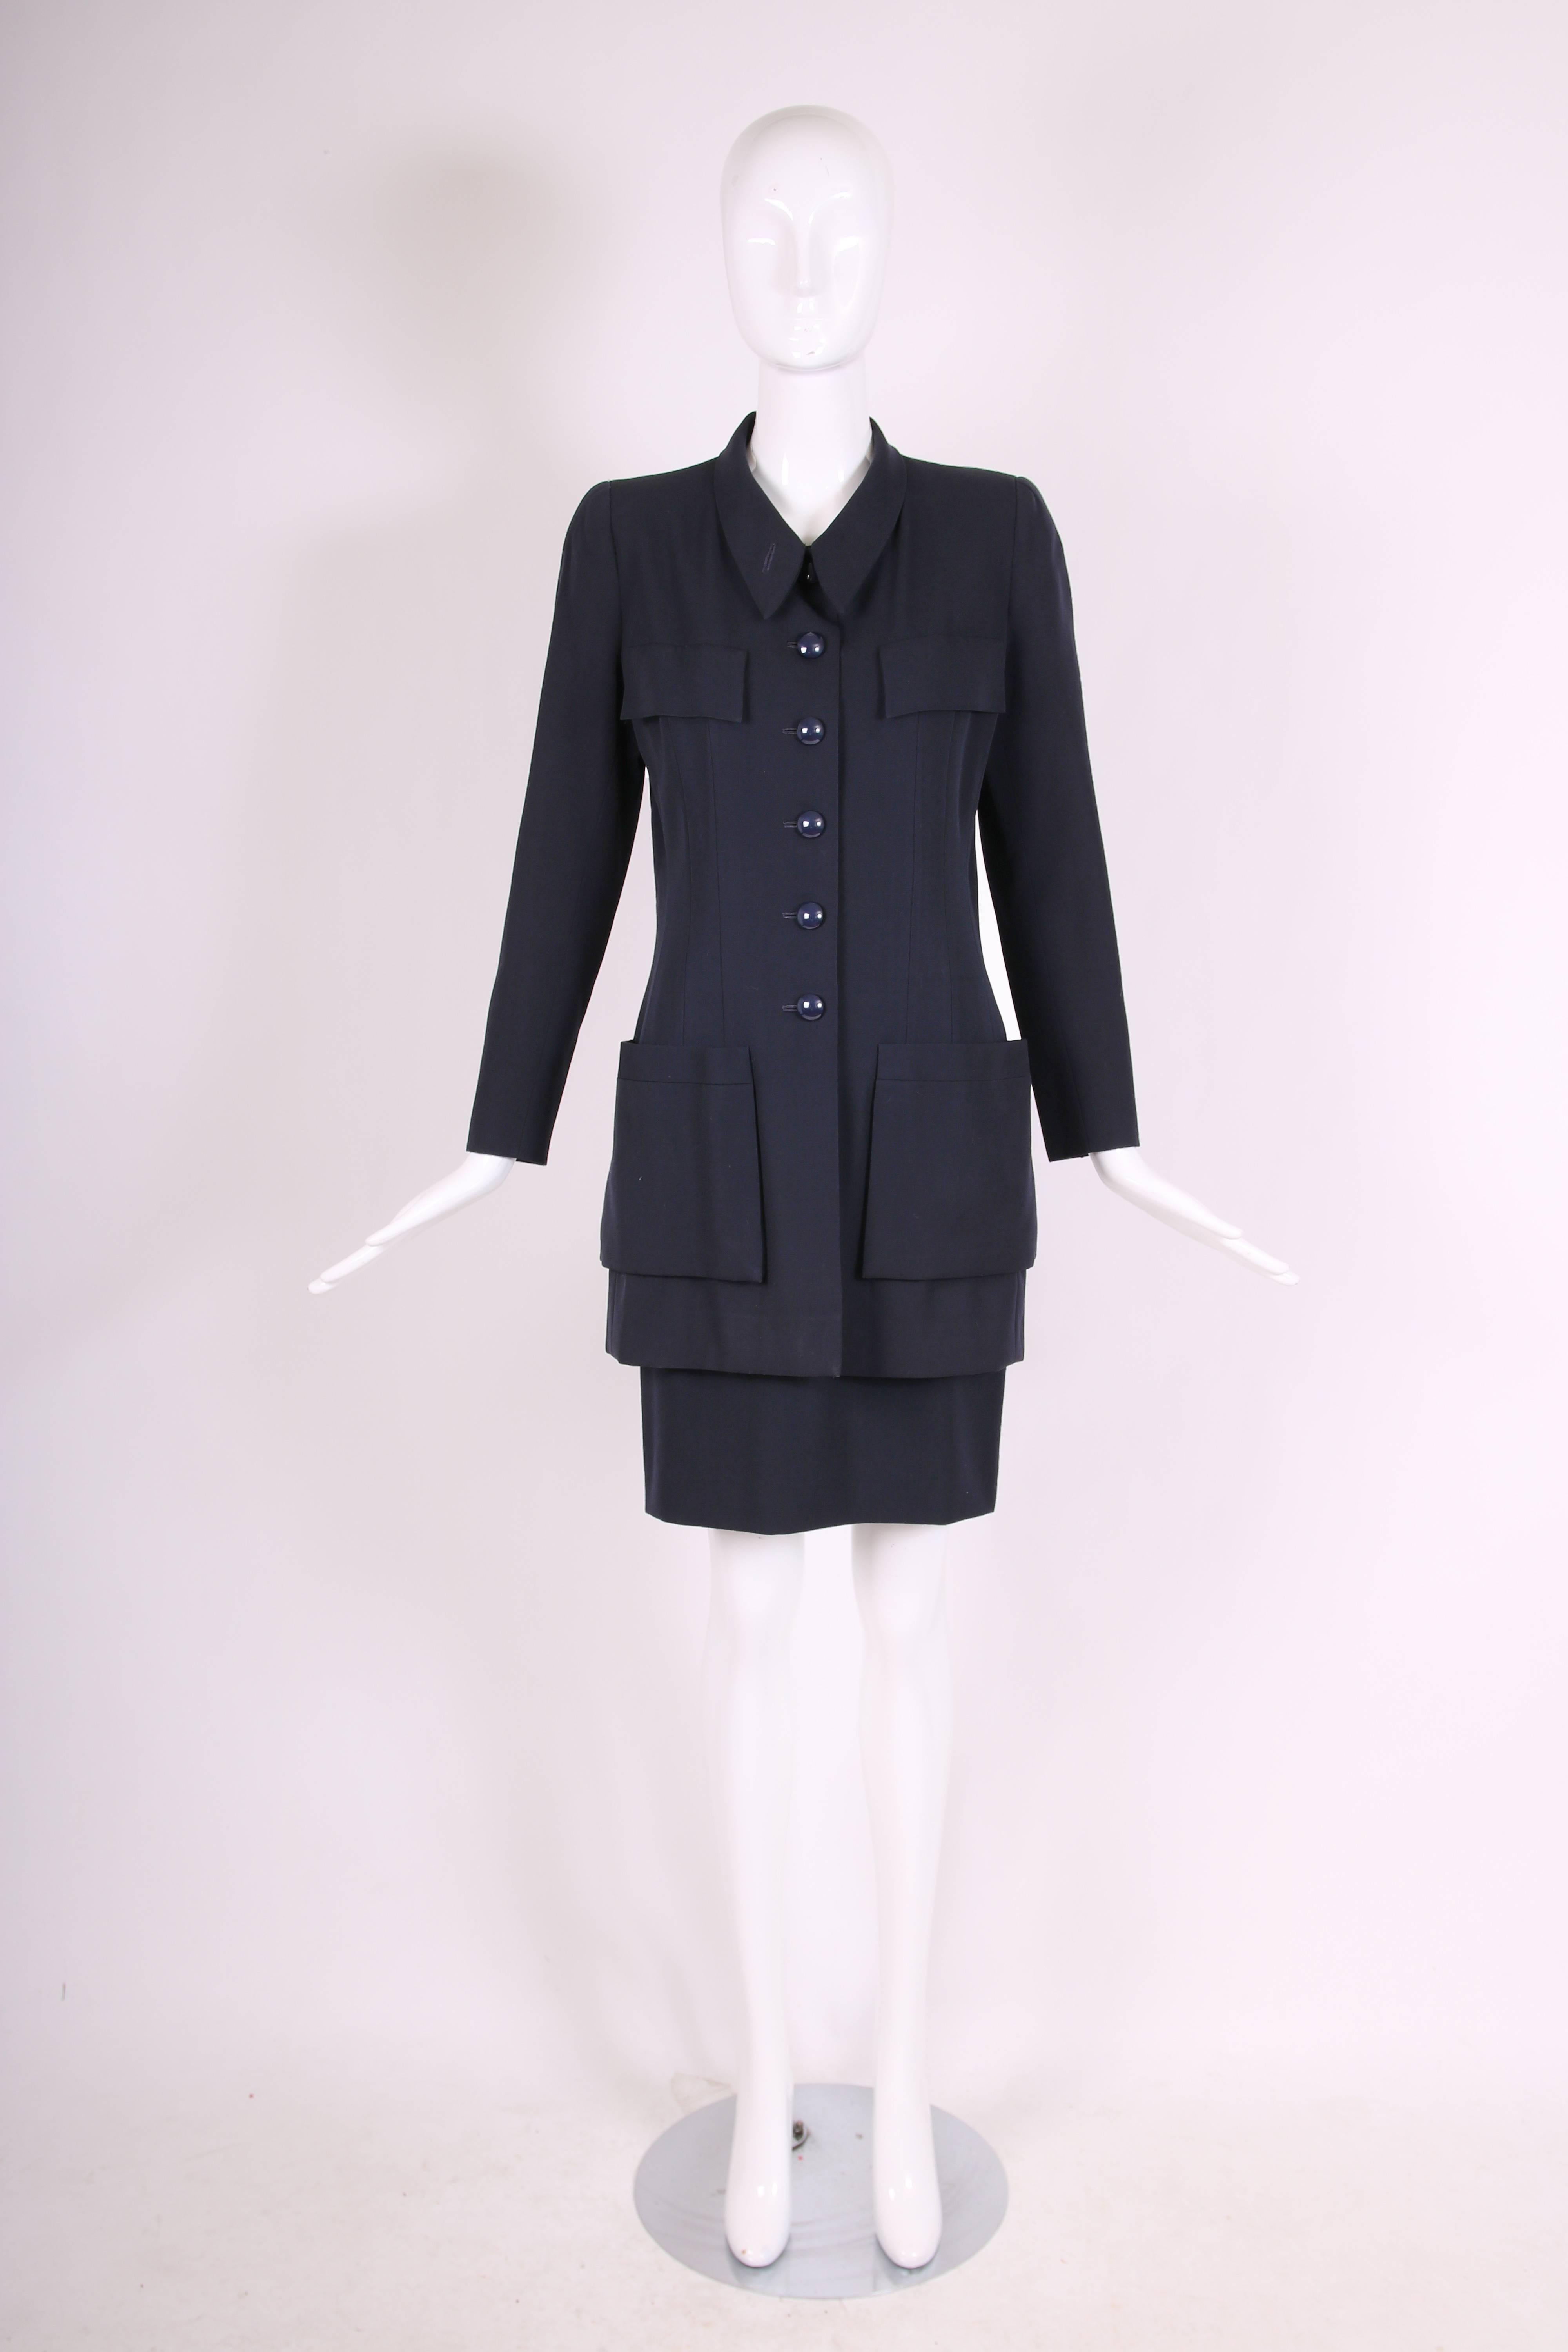 Chanel Haute Couture Navy Blue Wool Jacket and Skirt Ensemble No. 68181 In Excellent Condition In Studio City, CA